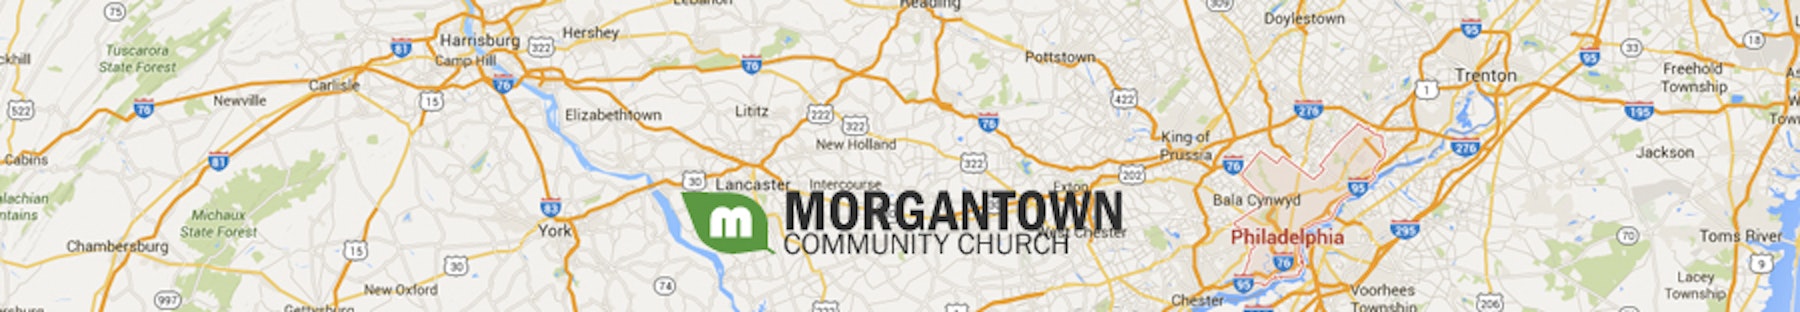 Morgantown Community Church: Early Adopters